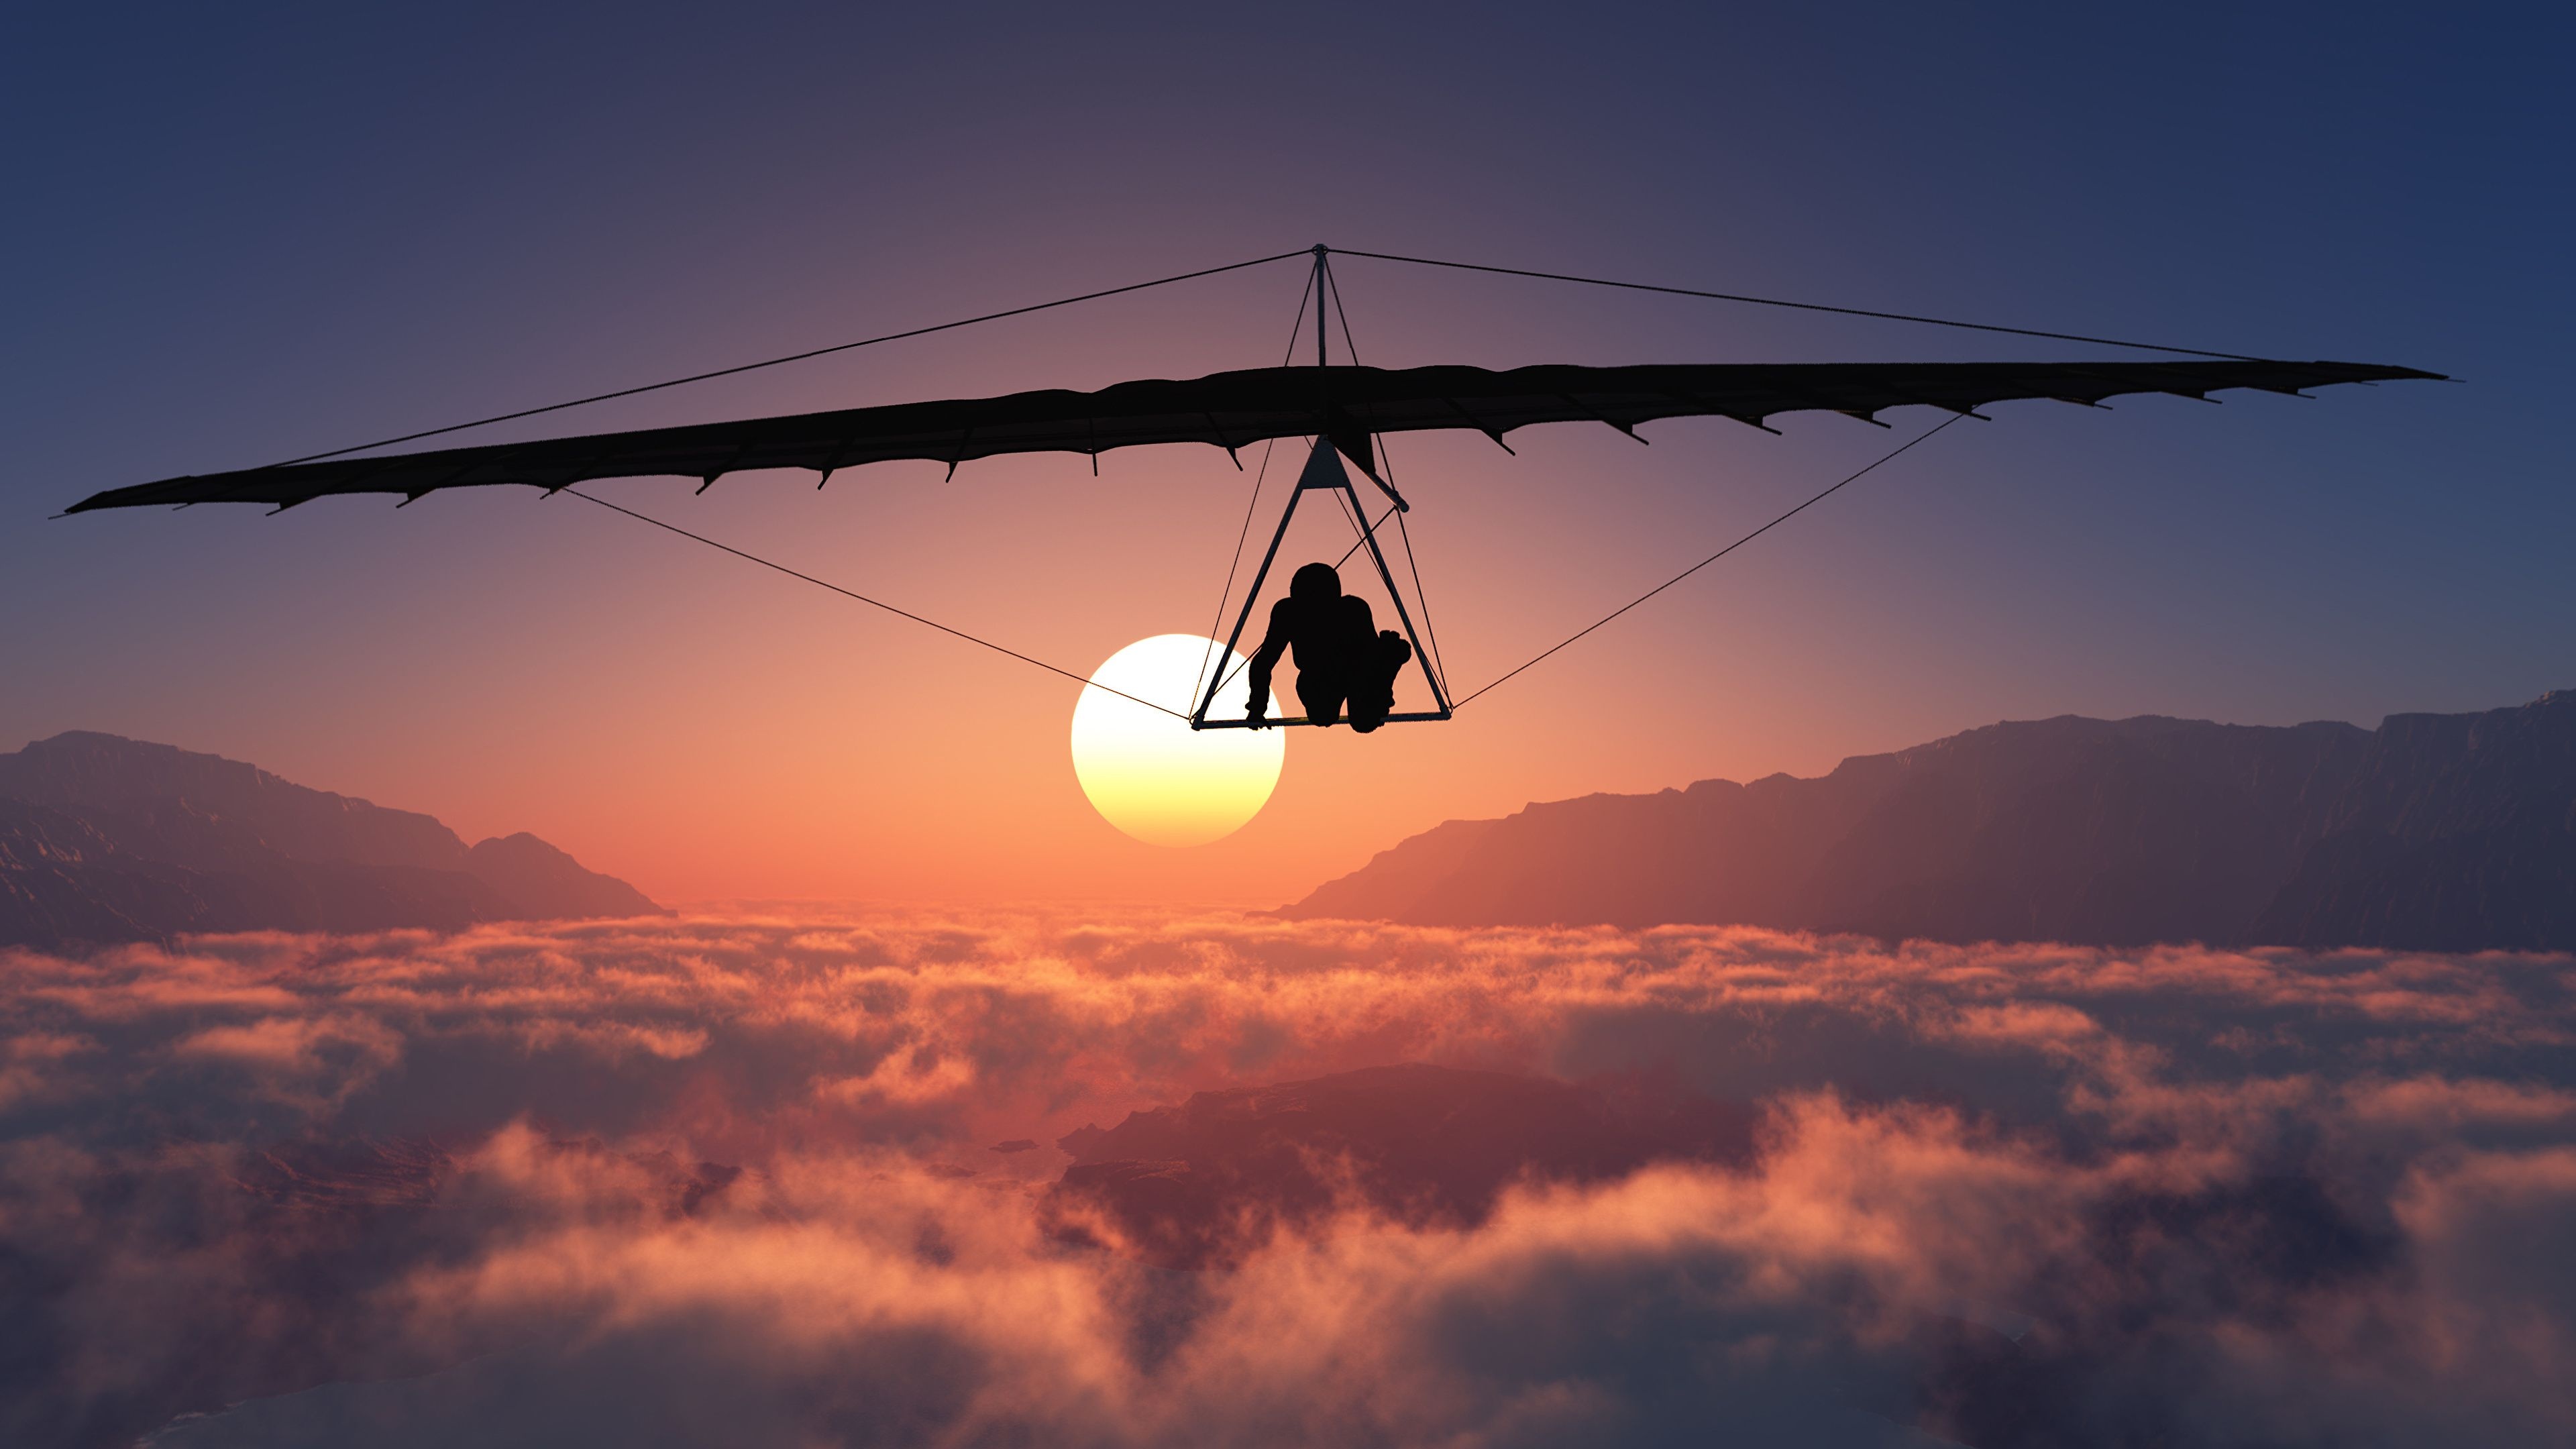 Gliding: Sunset Hang Gliding, A pilot controlling a foot-launched glider. 3840x2160 4K Background.